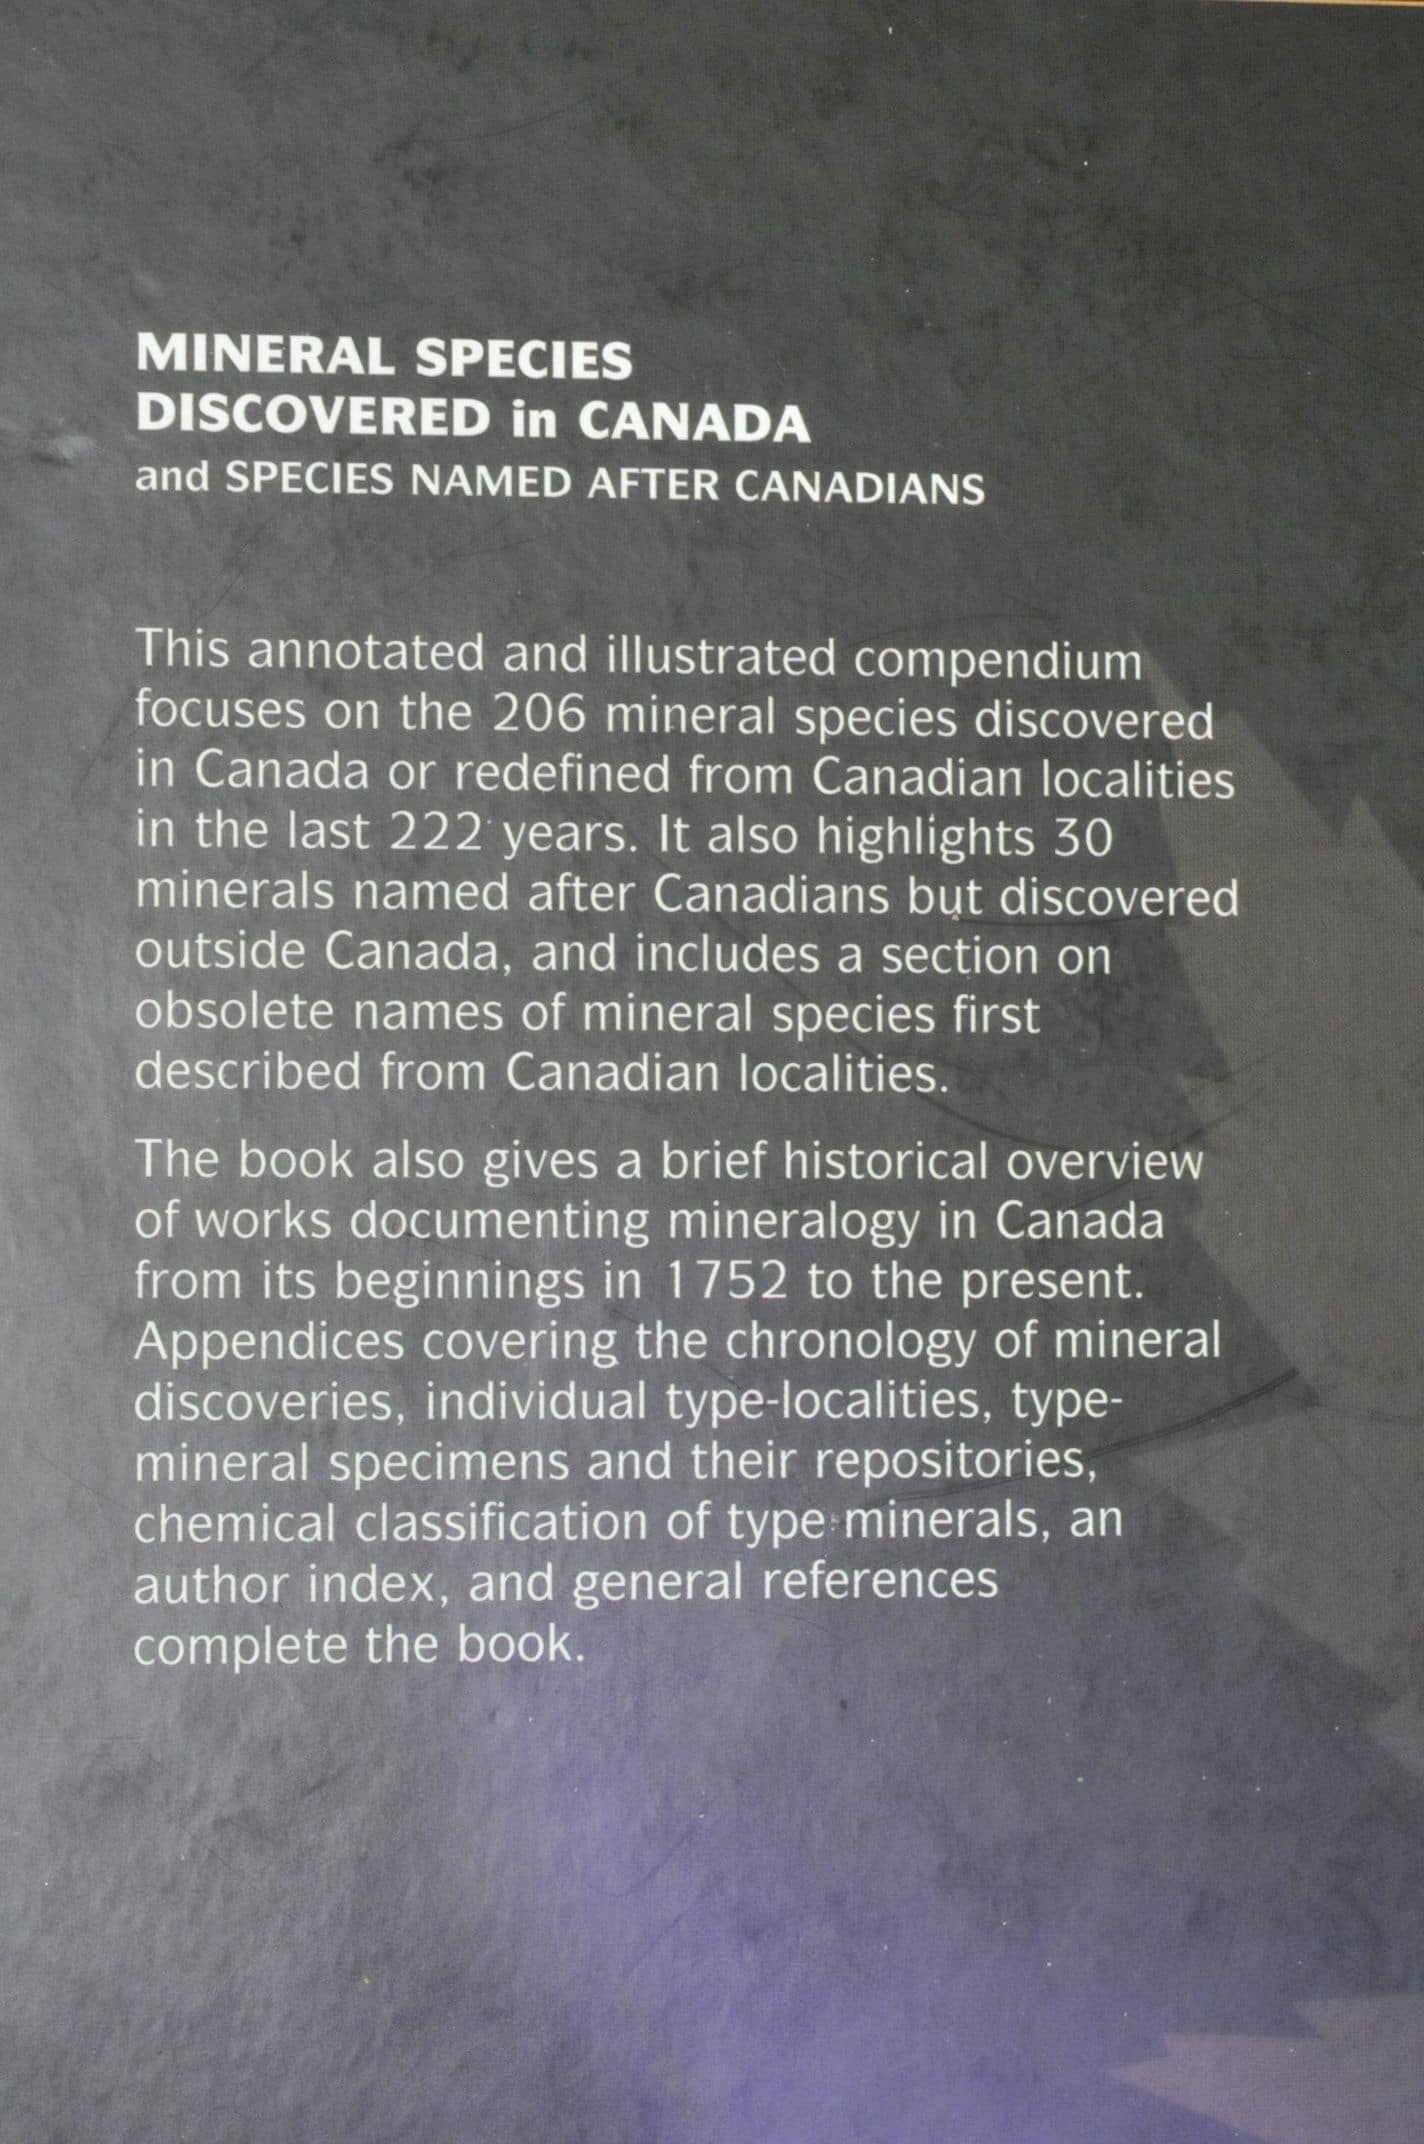 Mineral species discovered in Canada.